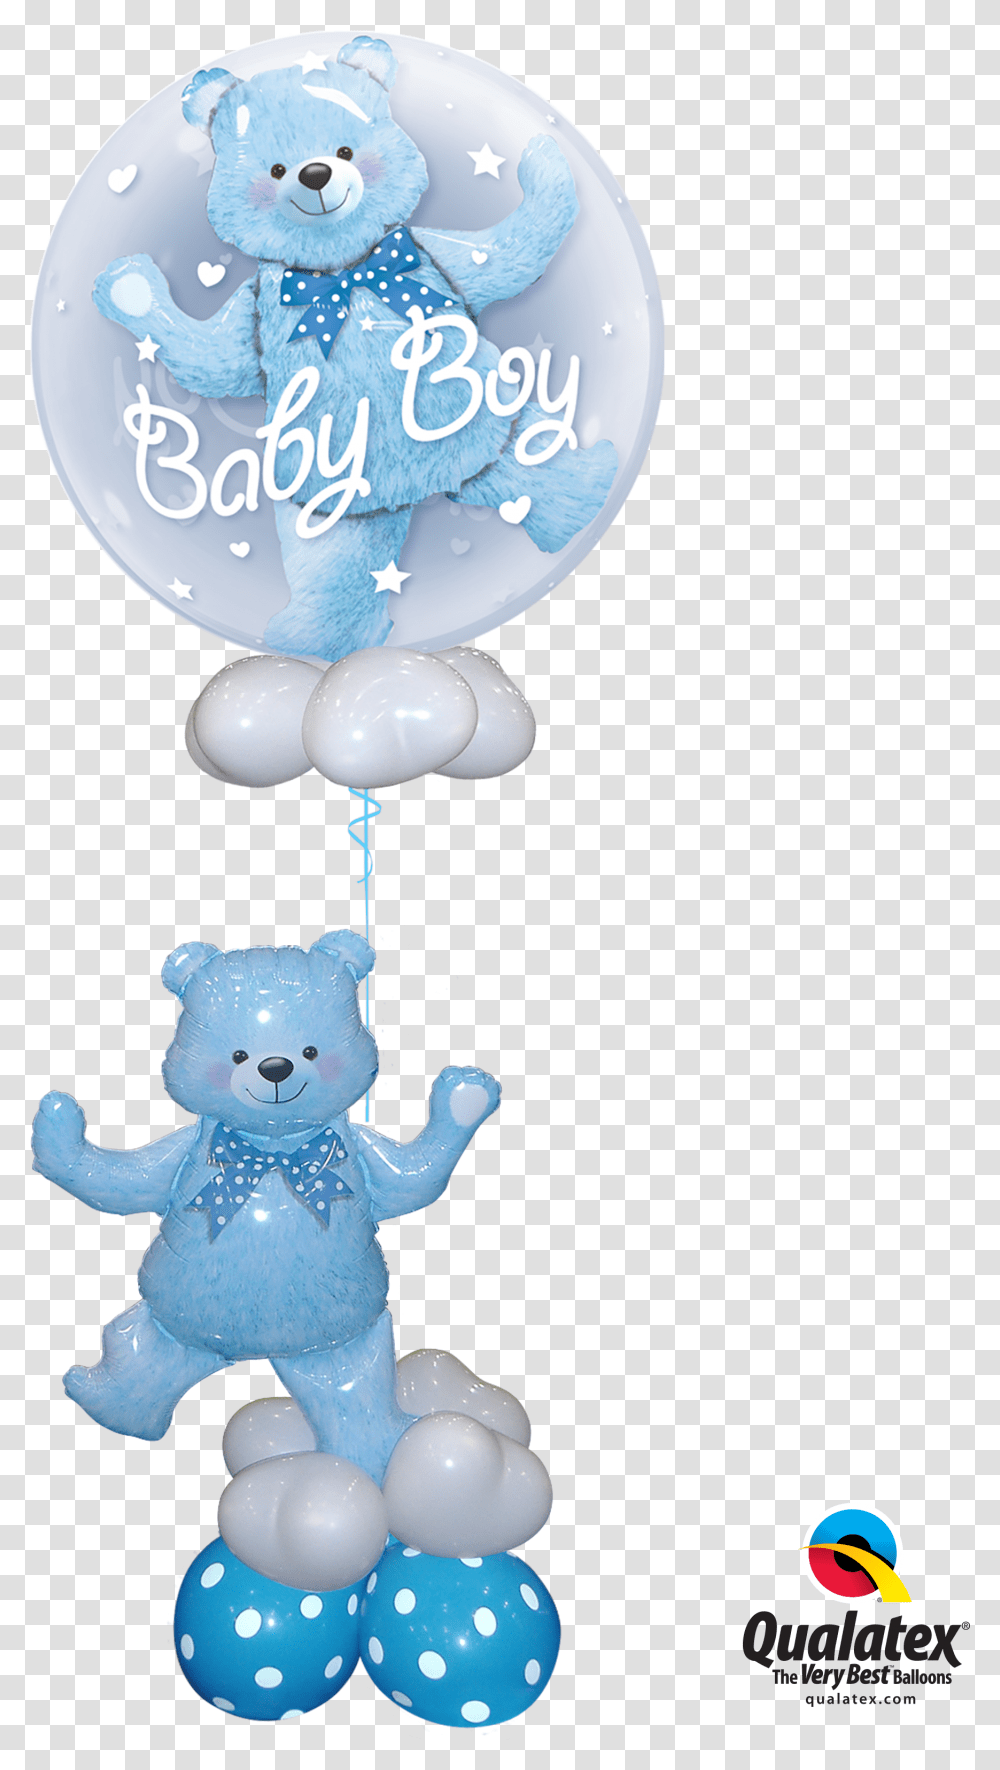 Balloon Bouquets Clipart Bouquet Balloons New Baby, Astronomy, Outer Space, Universe, Snowman Transparent Png